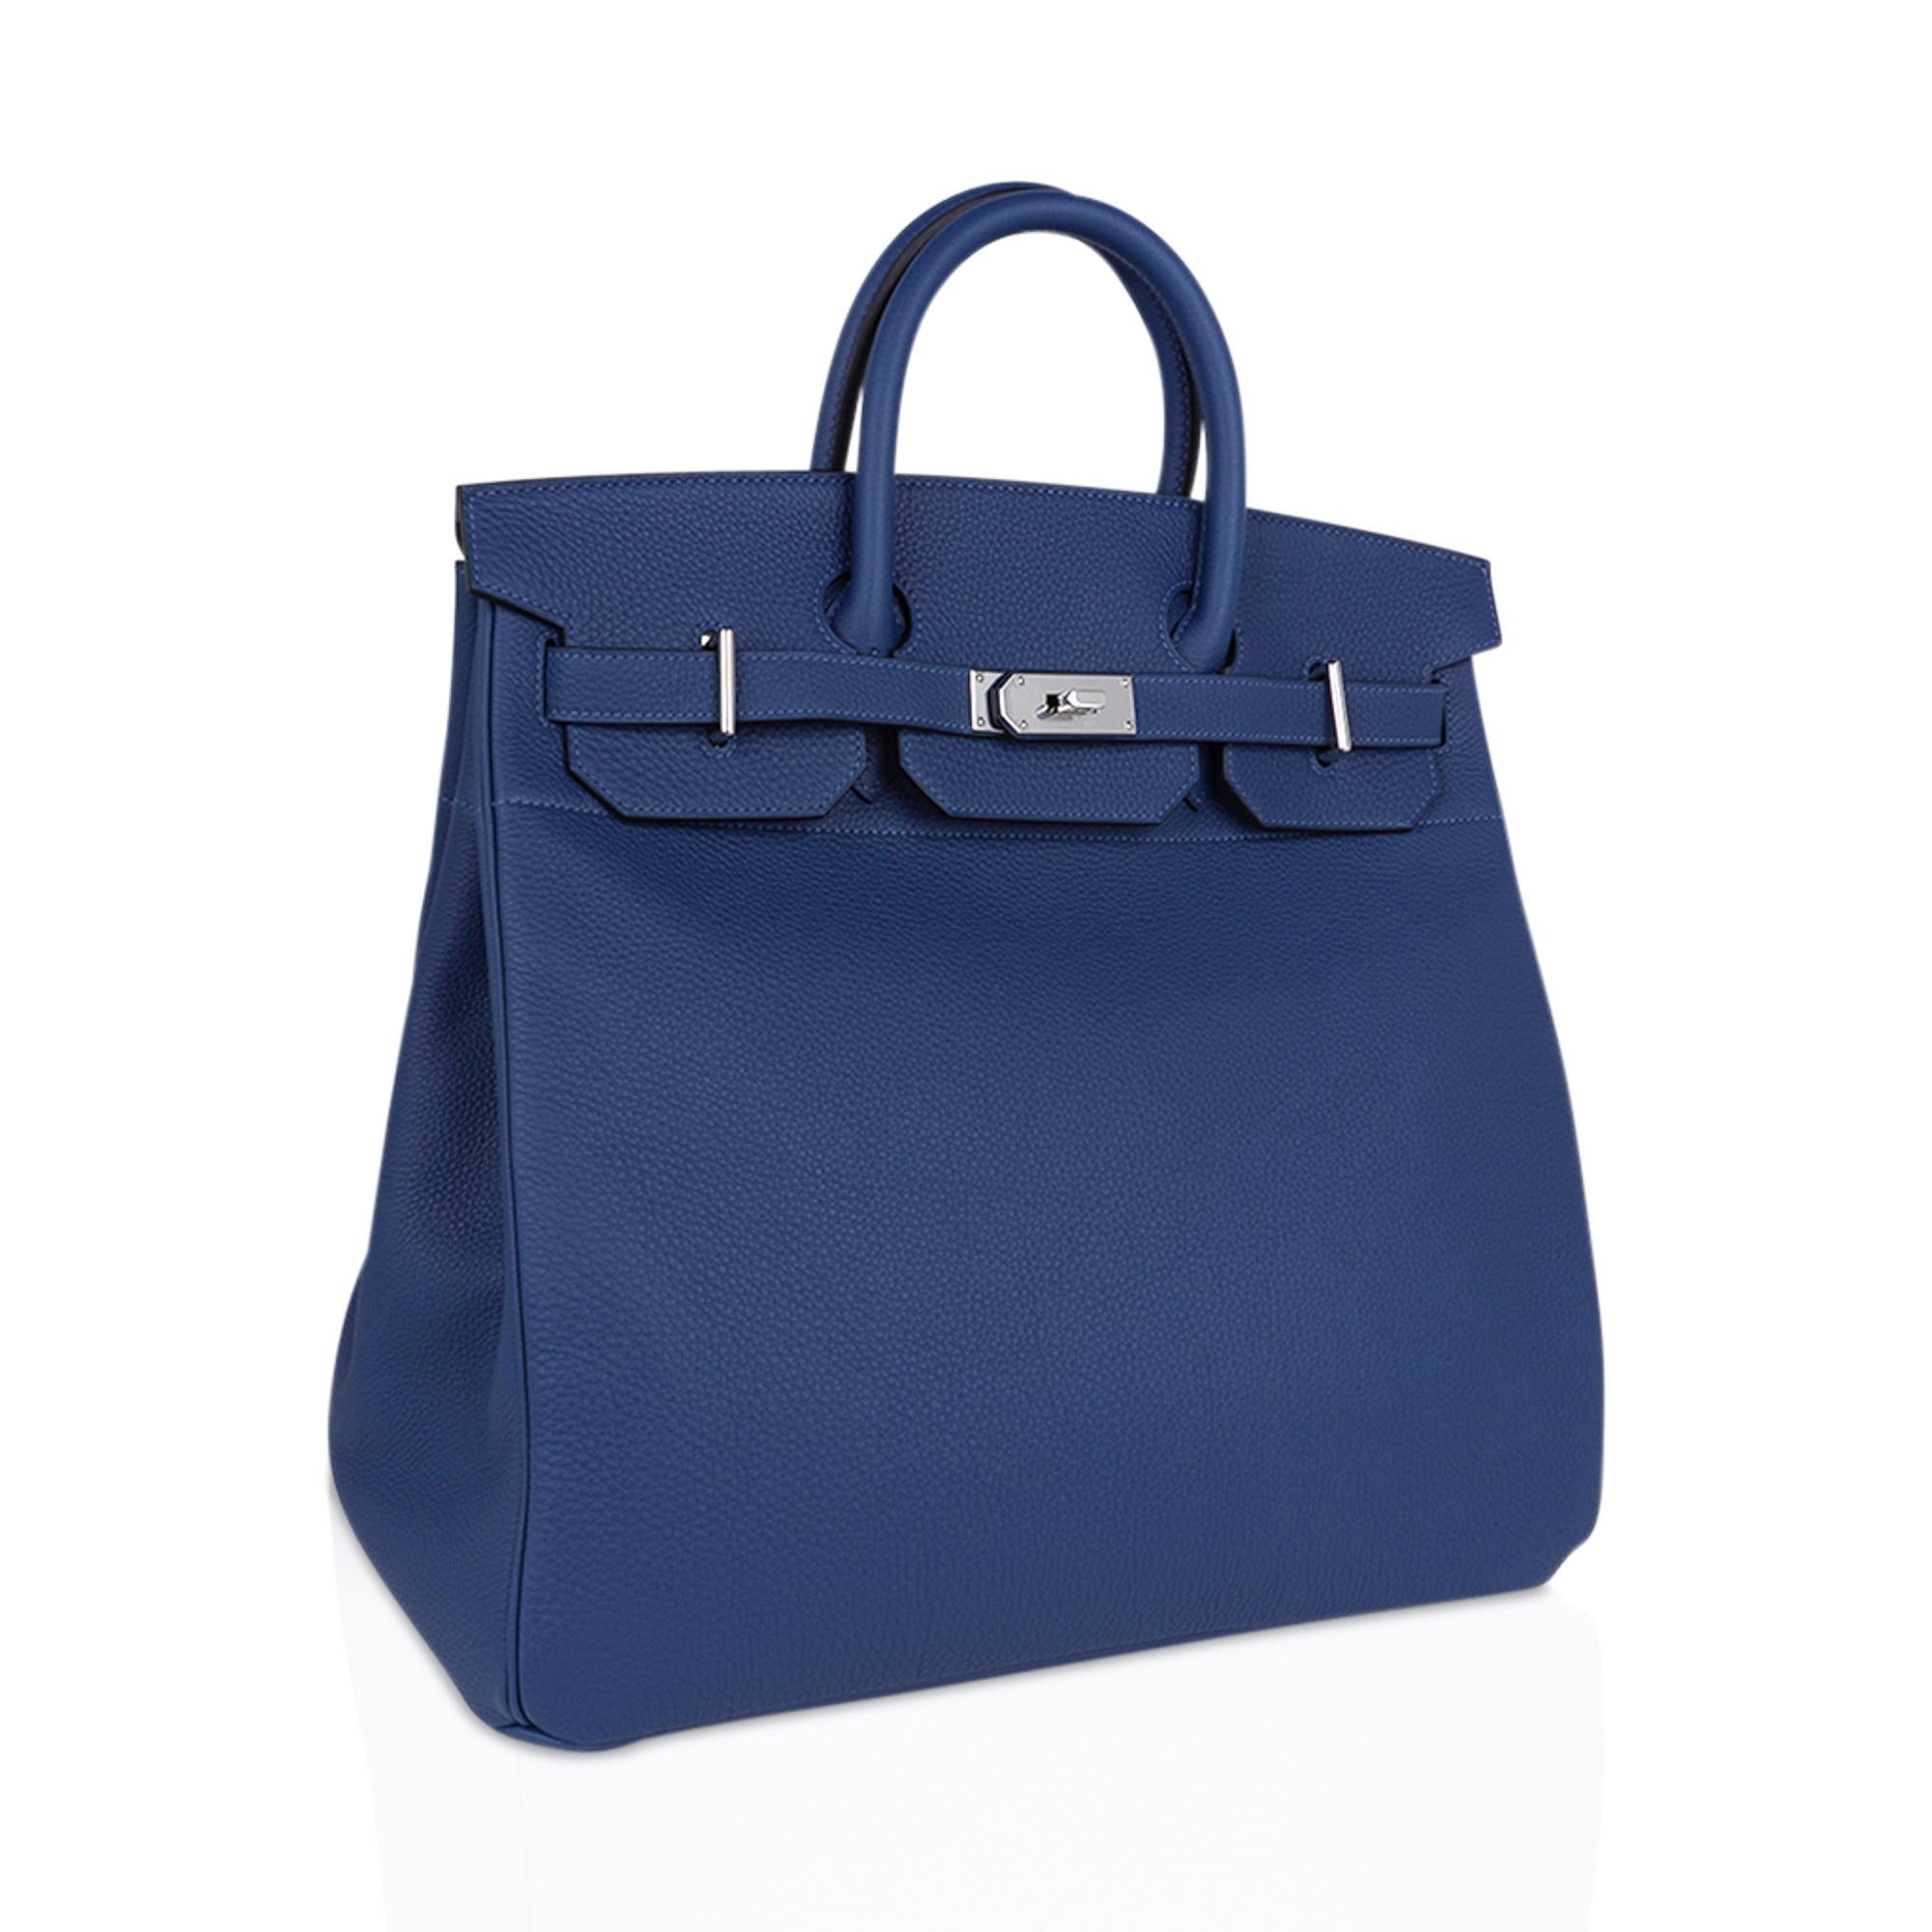 Mightychic offers an Hermes HAC 40 (Haut a Courroies) bag featured in Deep Blue.
Rare to find this beautiful tote bag is neutral perfection for everyday to travel wear.
This Hermes Hac bag is accentuated with crisp palladium hardware.
Beautiful Togo